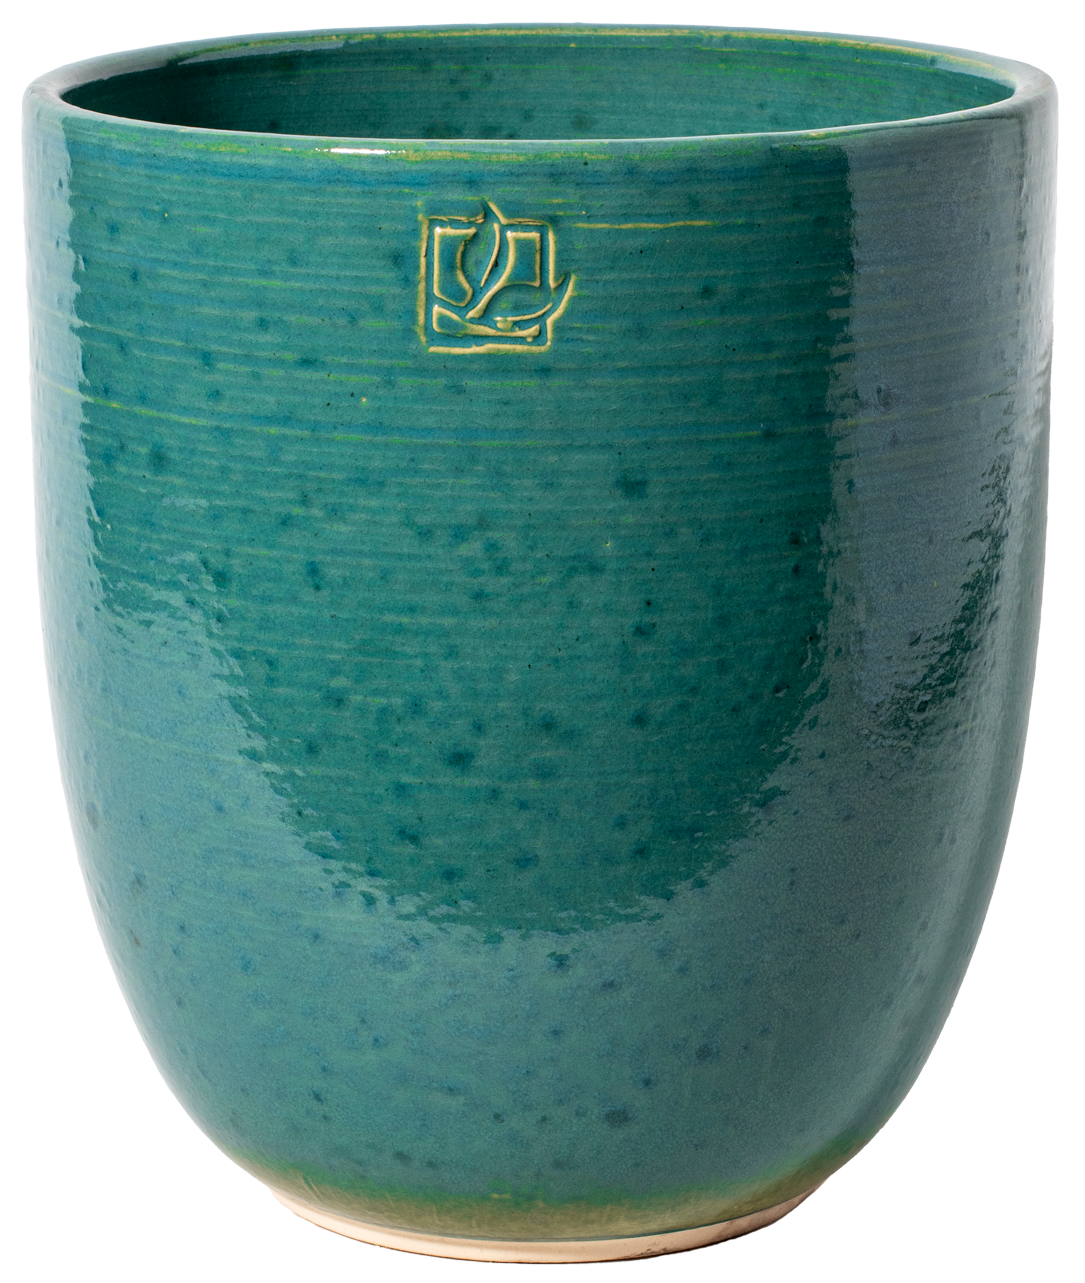 tall rounded turquoise ceramic planter with a leaf stamp